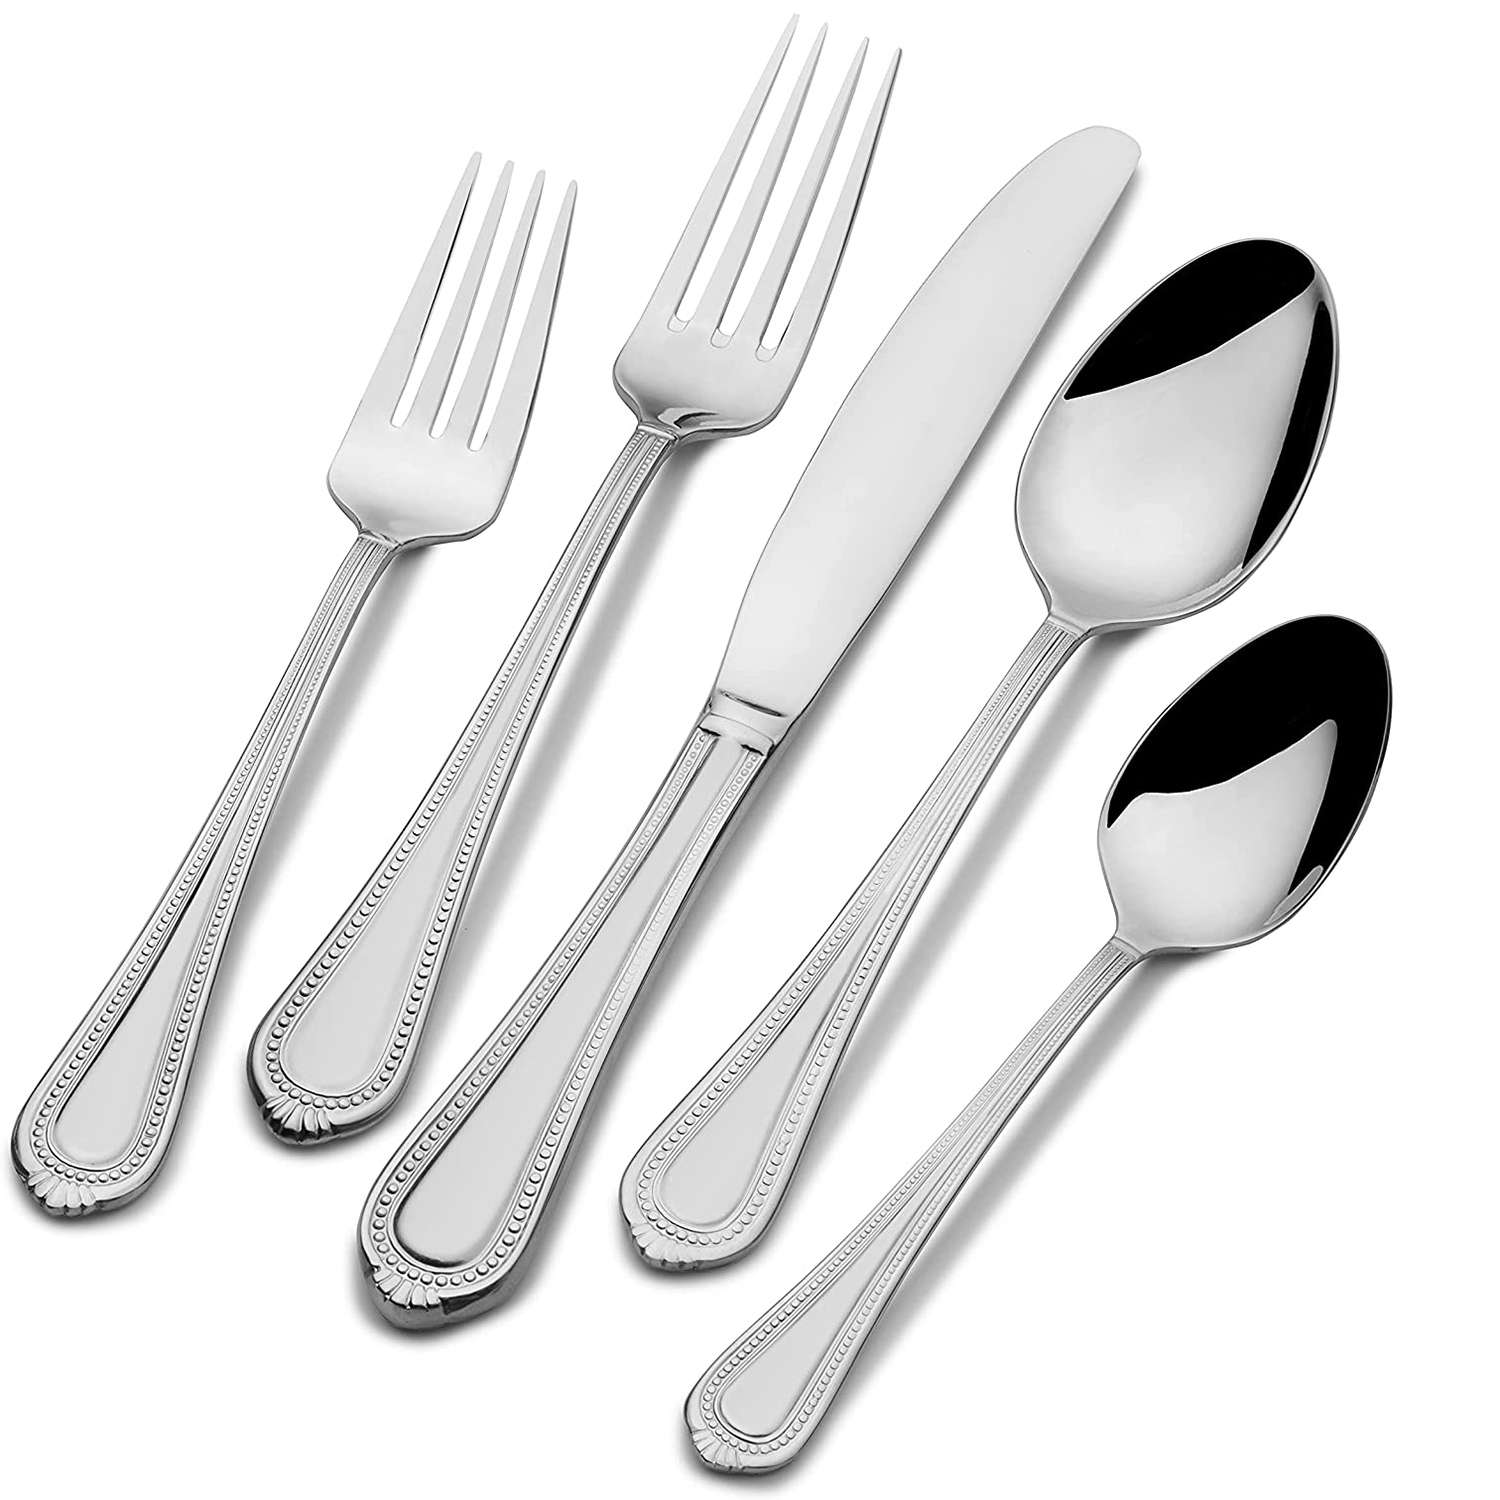 ARI by Mikasa Stainless Flatware YOUR CHOICE 